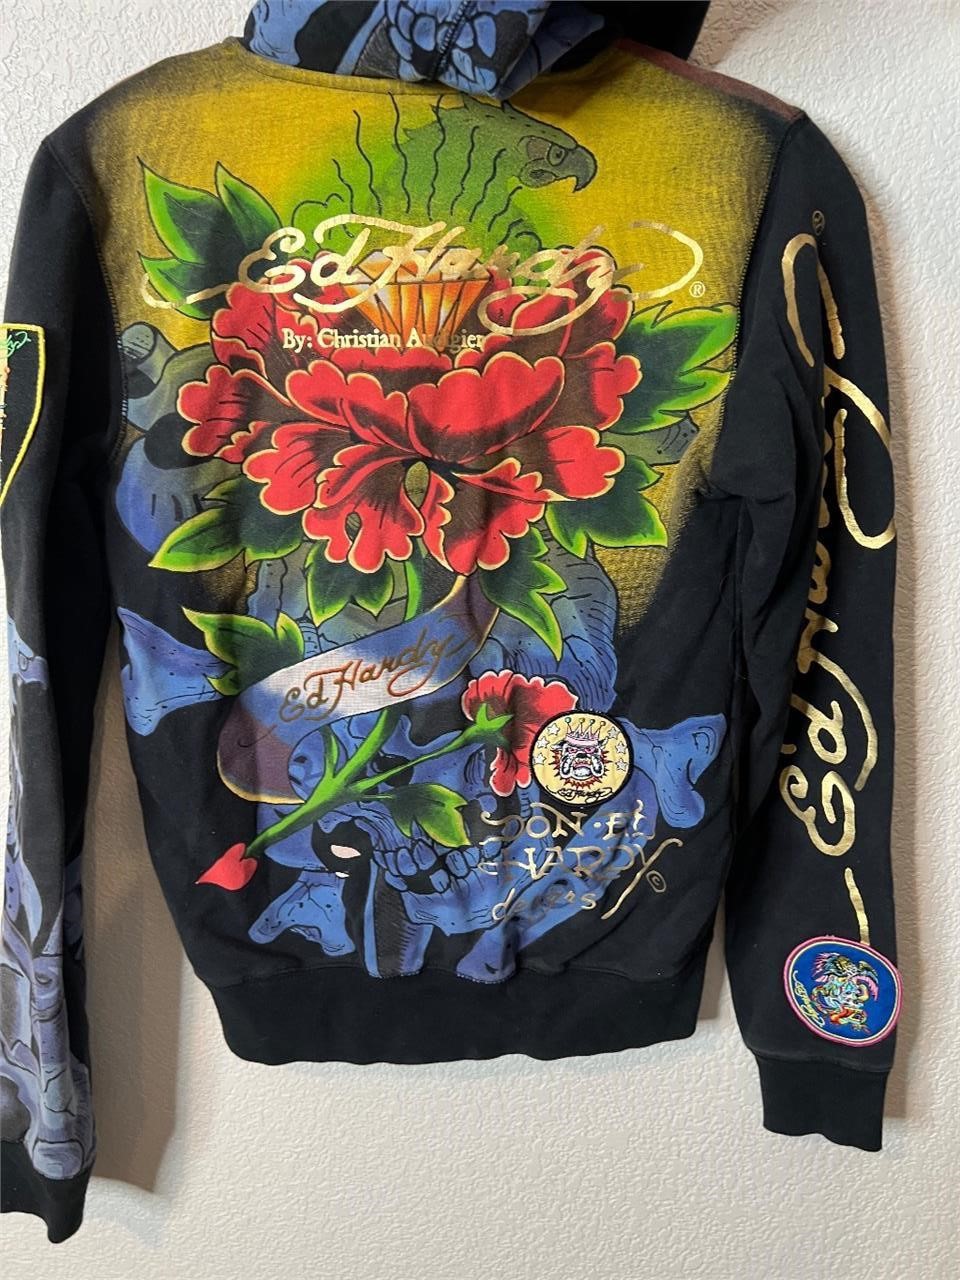 5/20/24 Vintage Clothing Auction